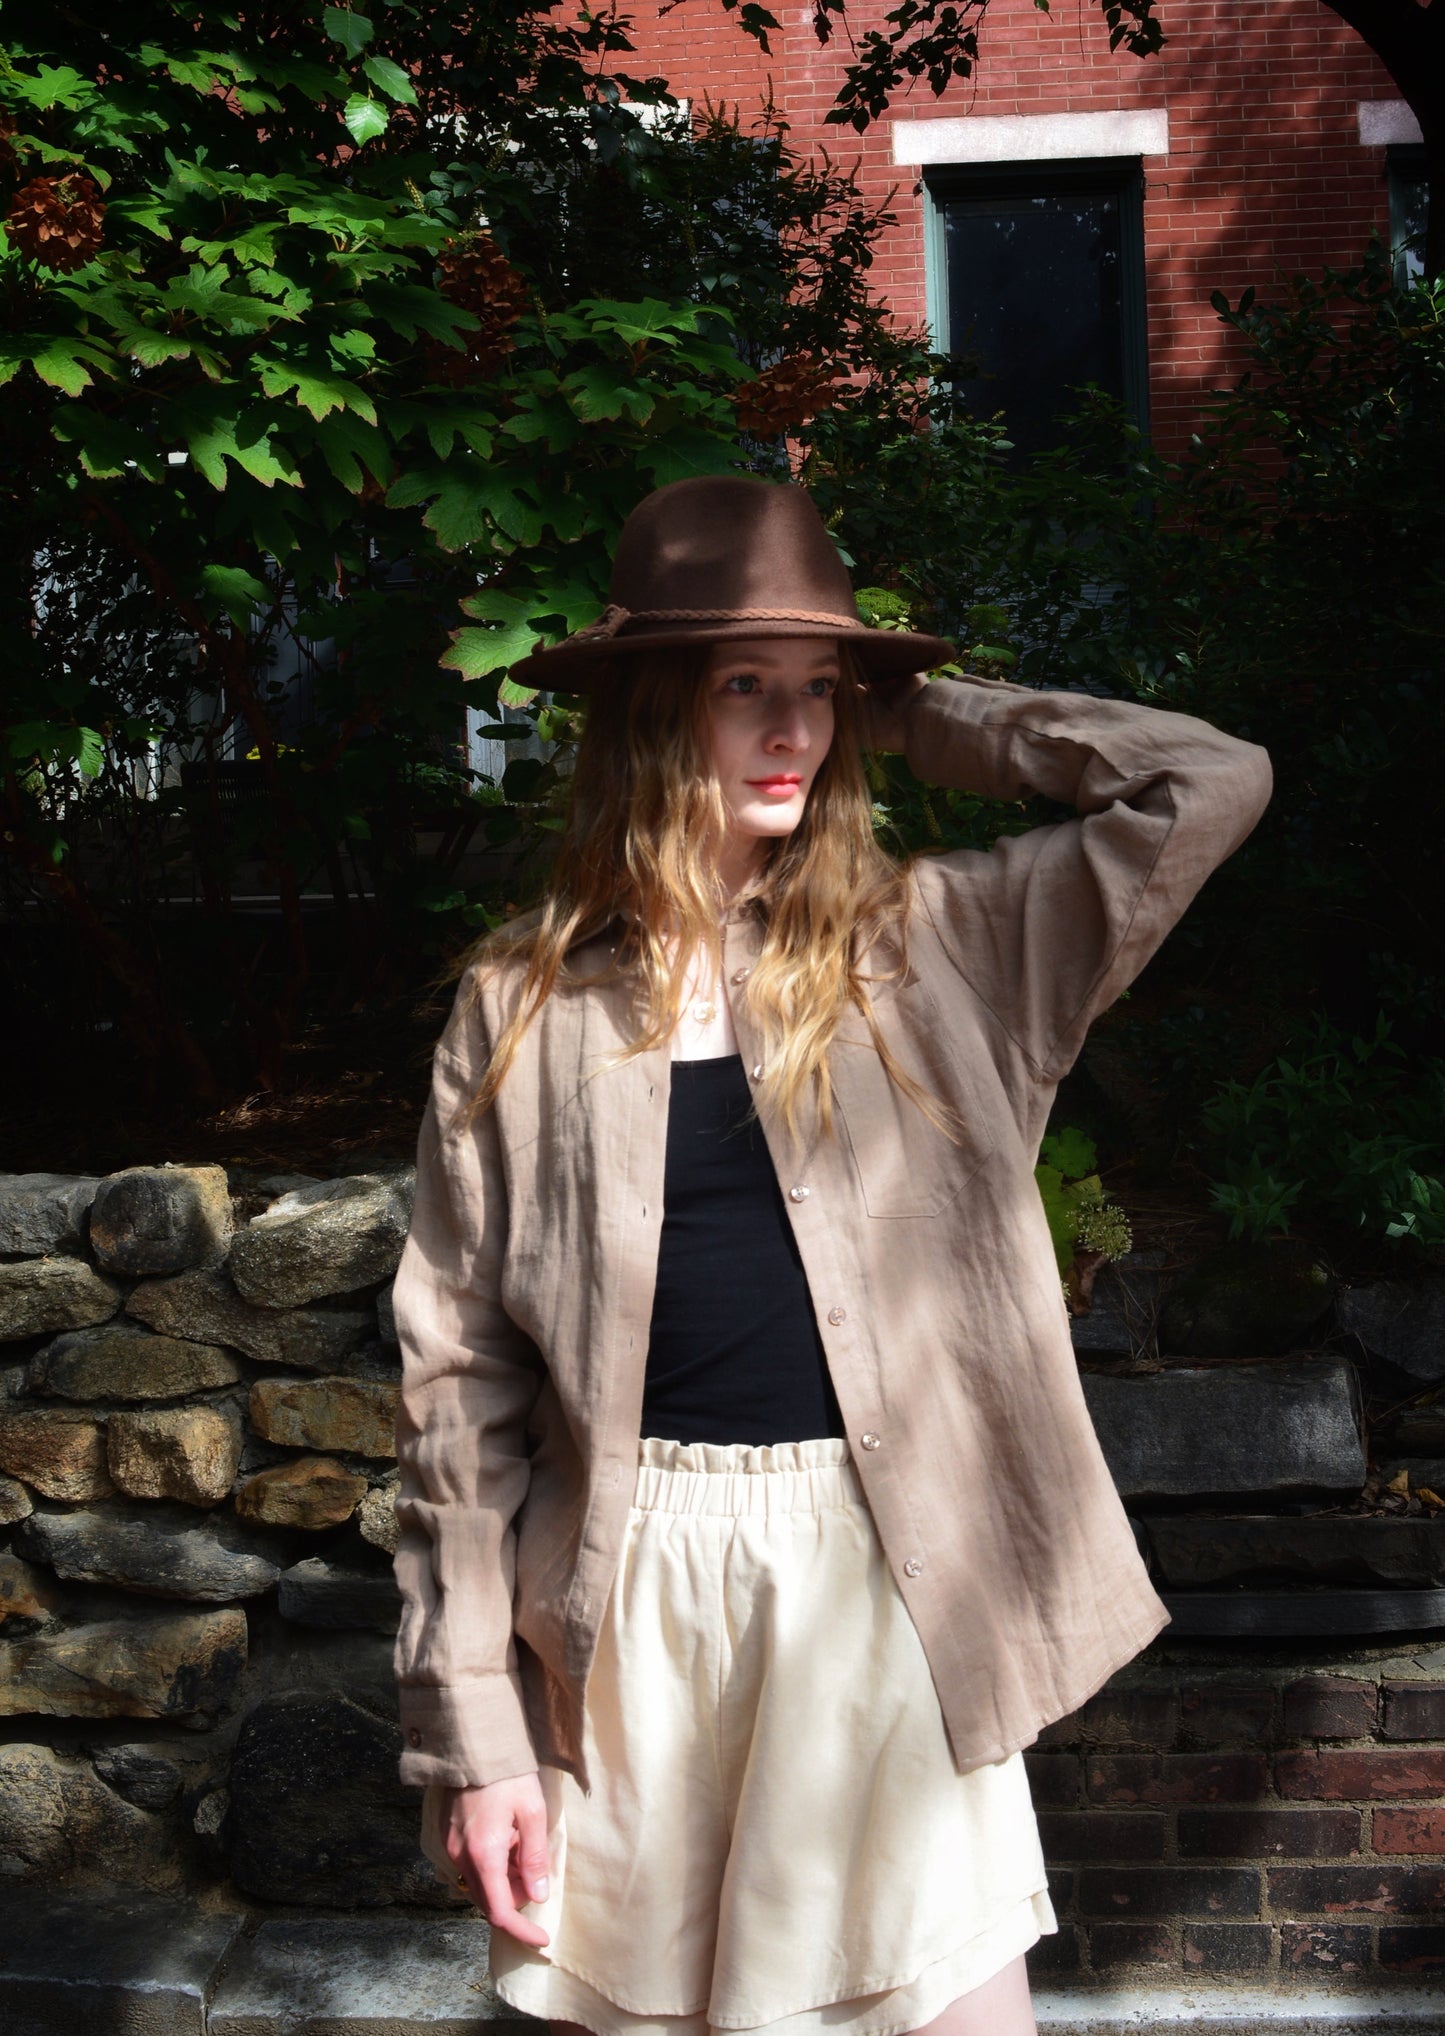 Linen Long Sleeve Shirt in Bronzed Brown color